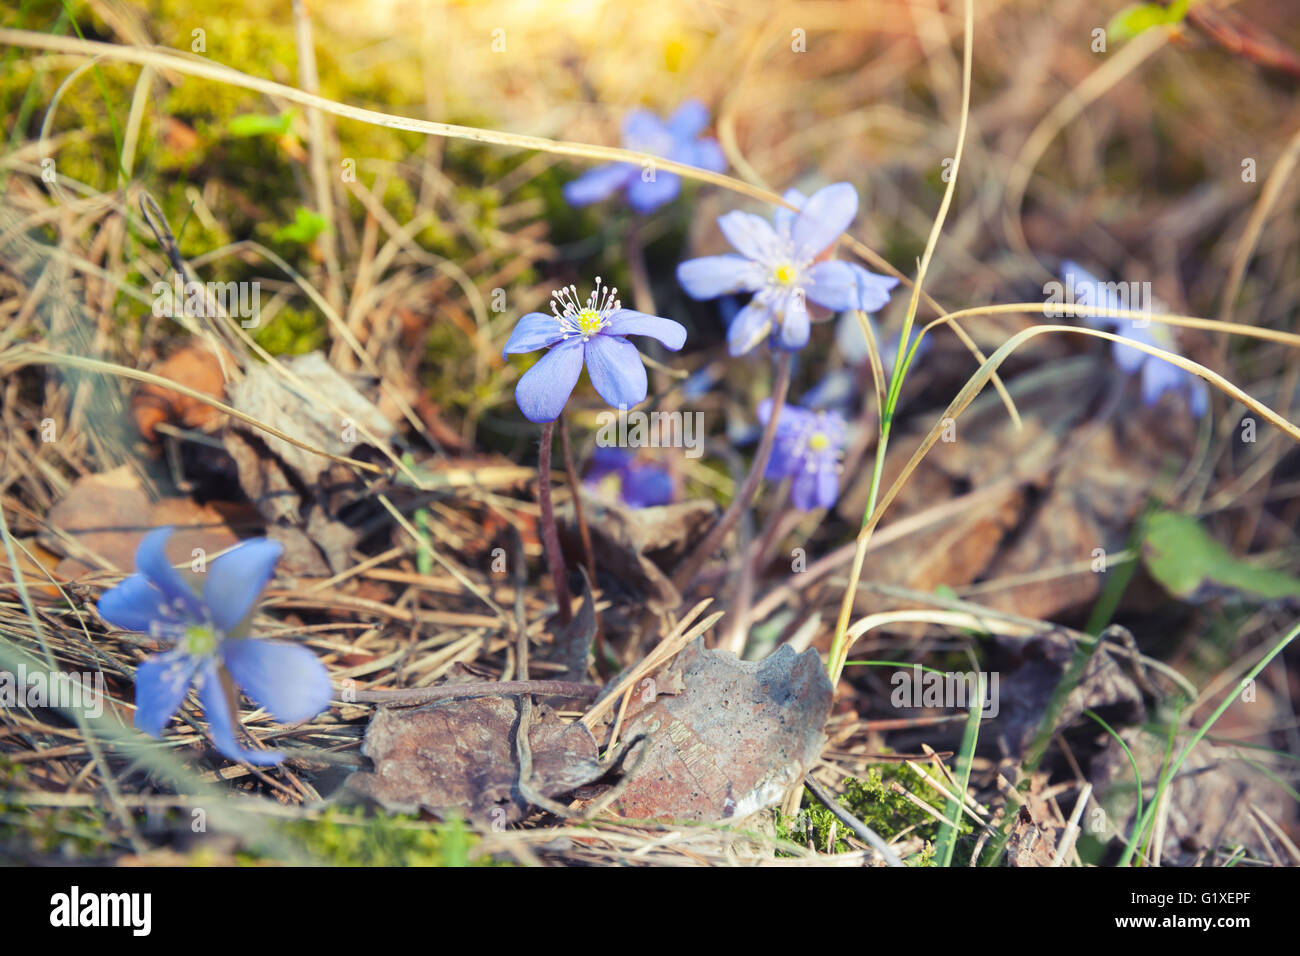 Blue Hepatica flowers in the forest, spring season. Macro photo with selective focus Stock Photo